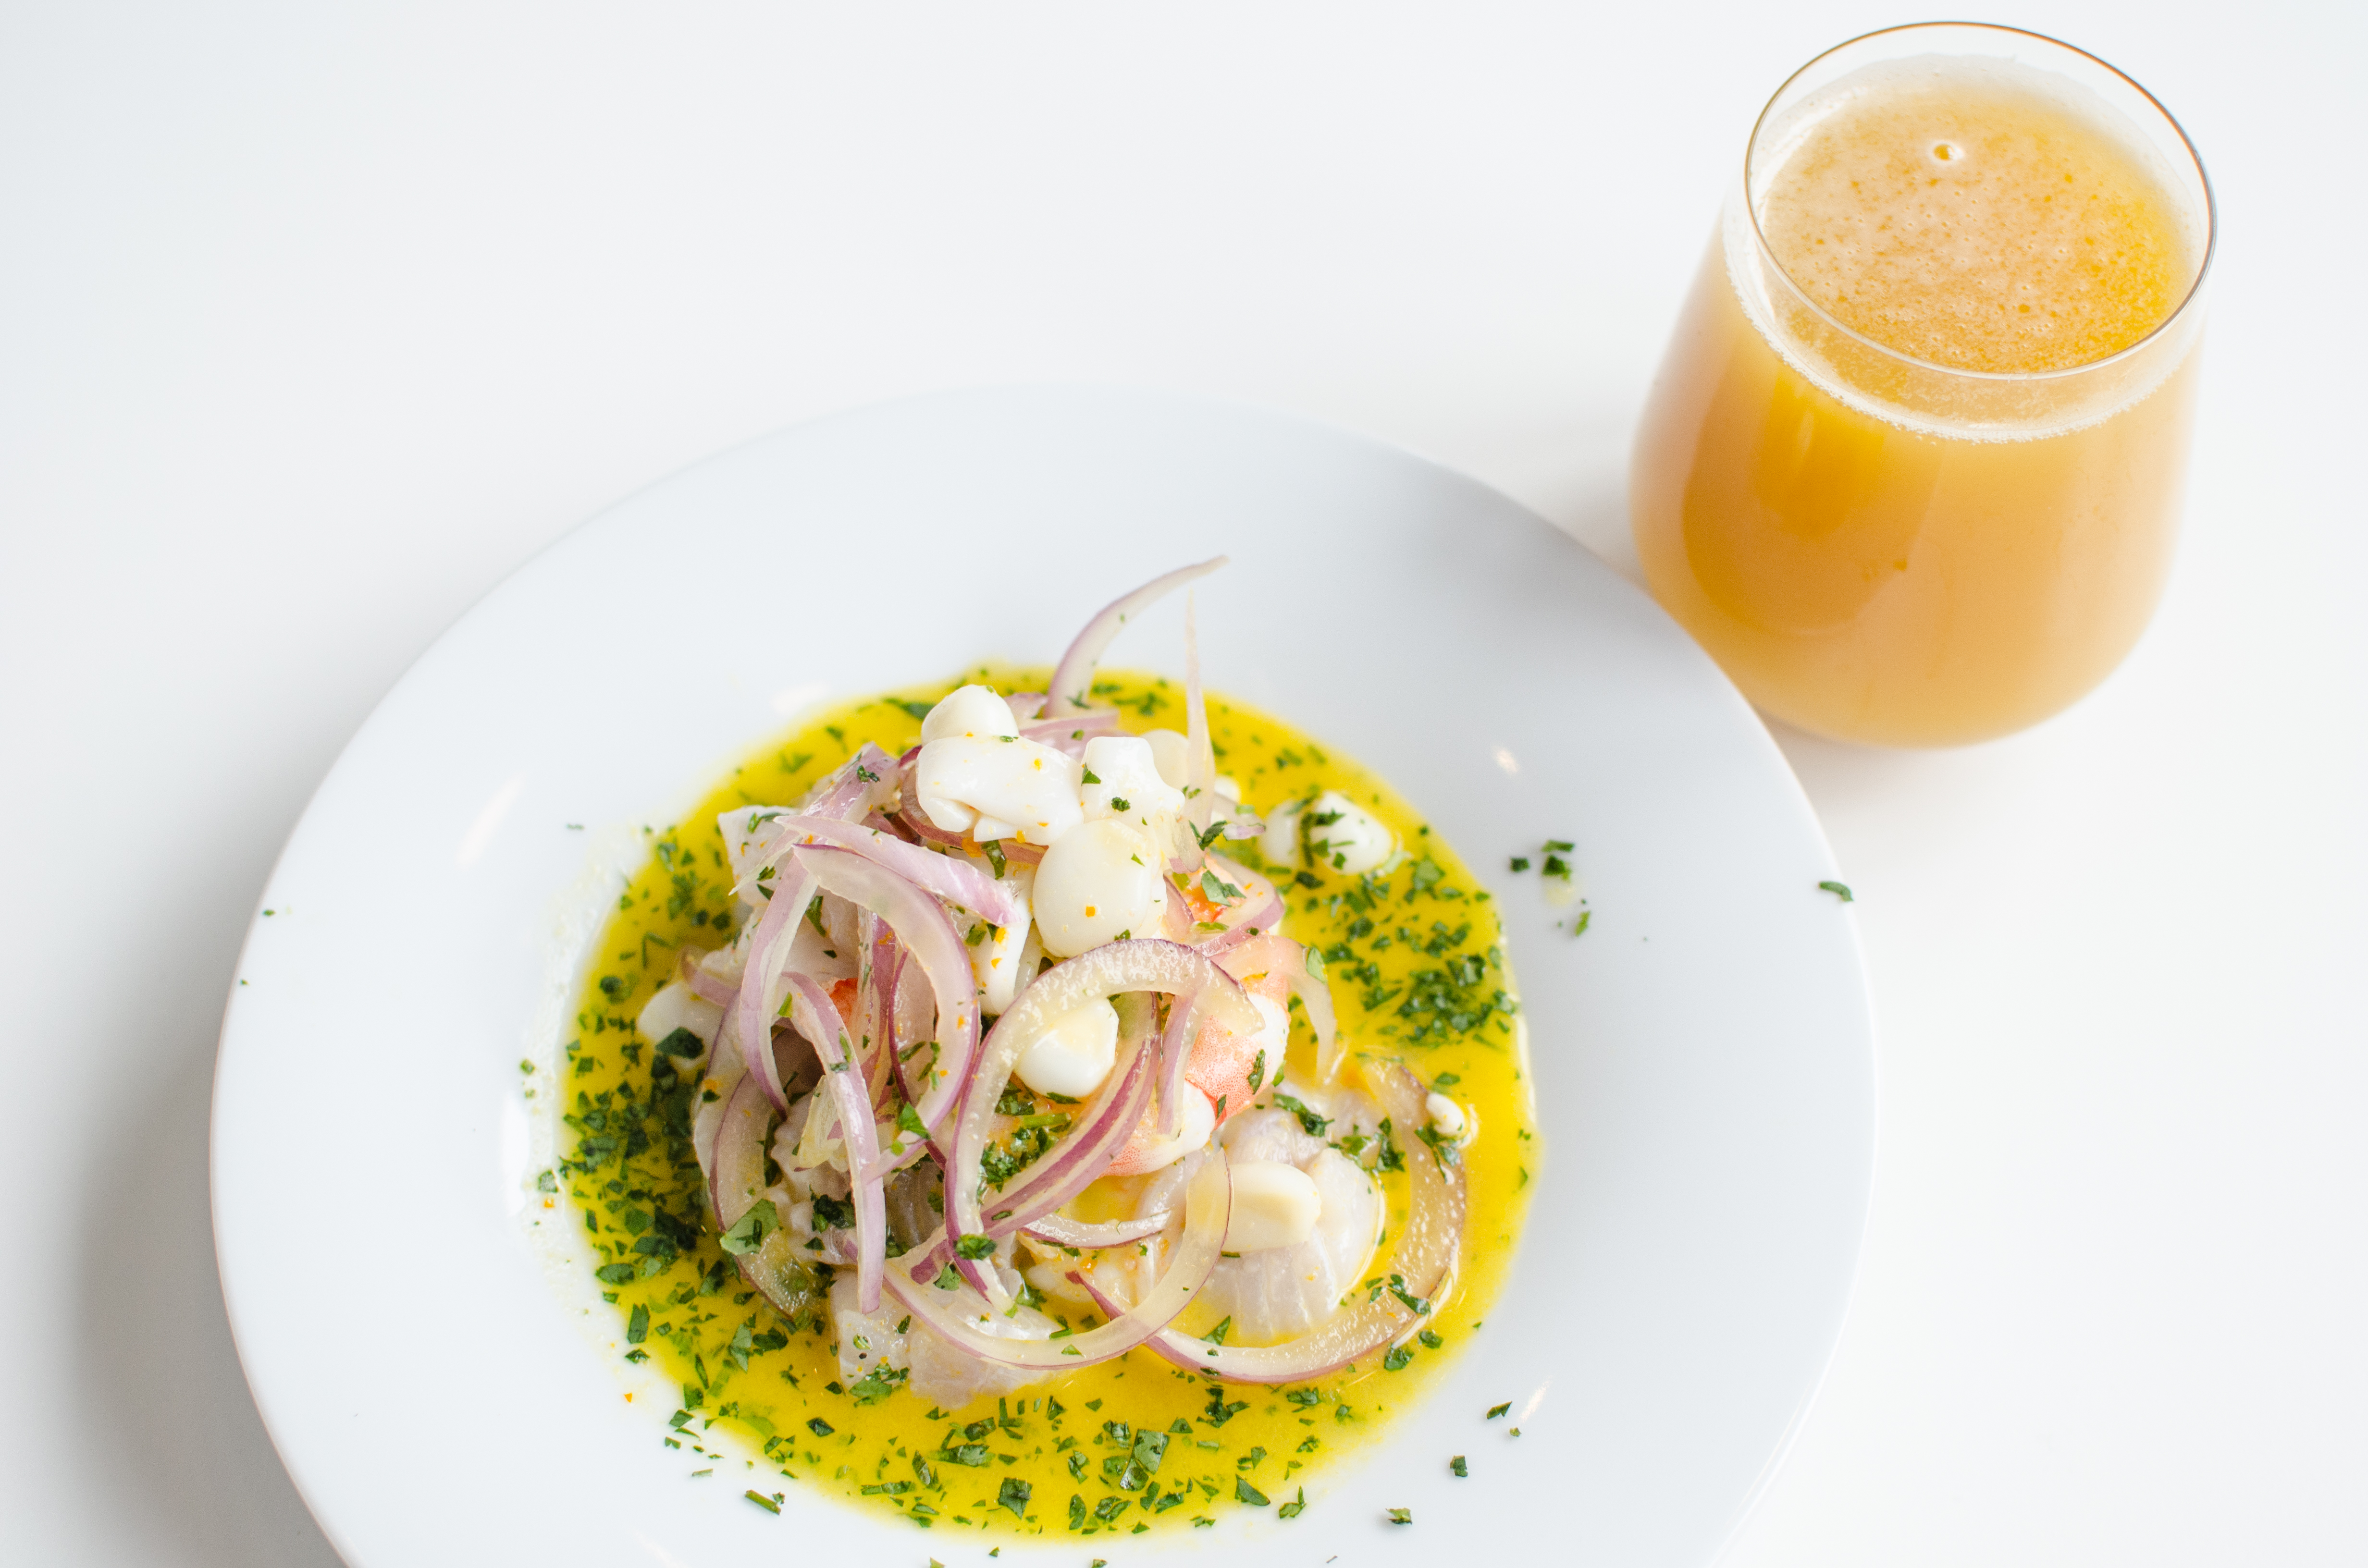 A vibrantly colored portion of ceviche is presented on a white plate on a white table, with a glass of beer on the side.